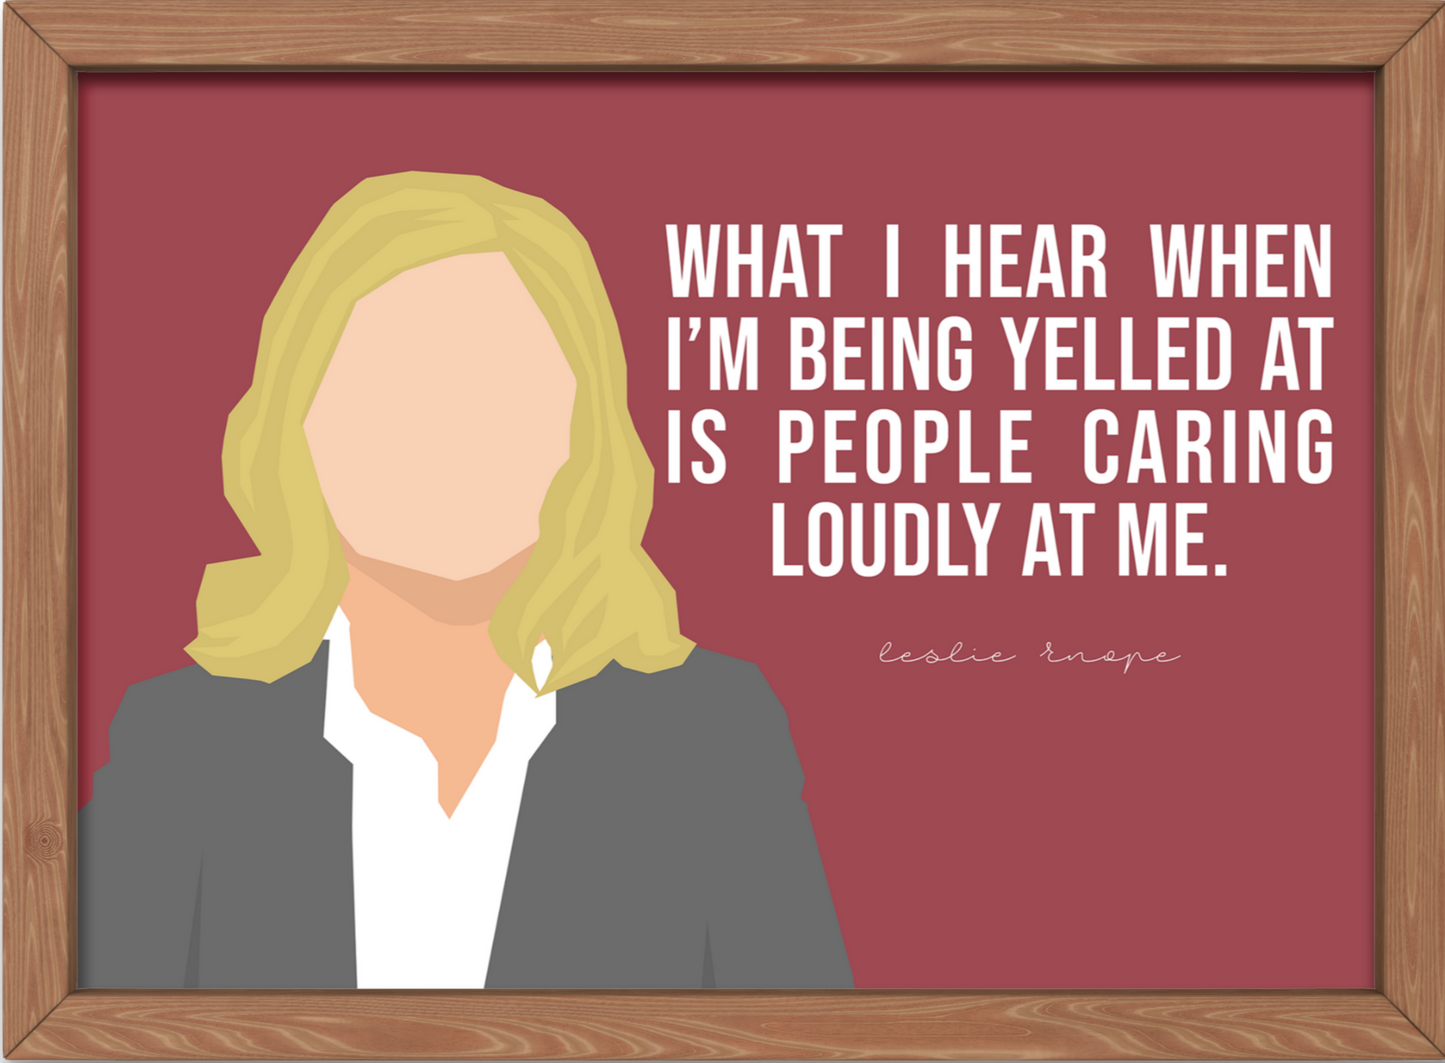 Parks and Recreation Poster | Leslie Knope Quote - People caring loudly